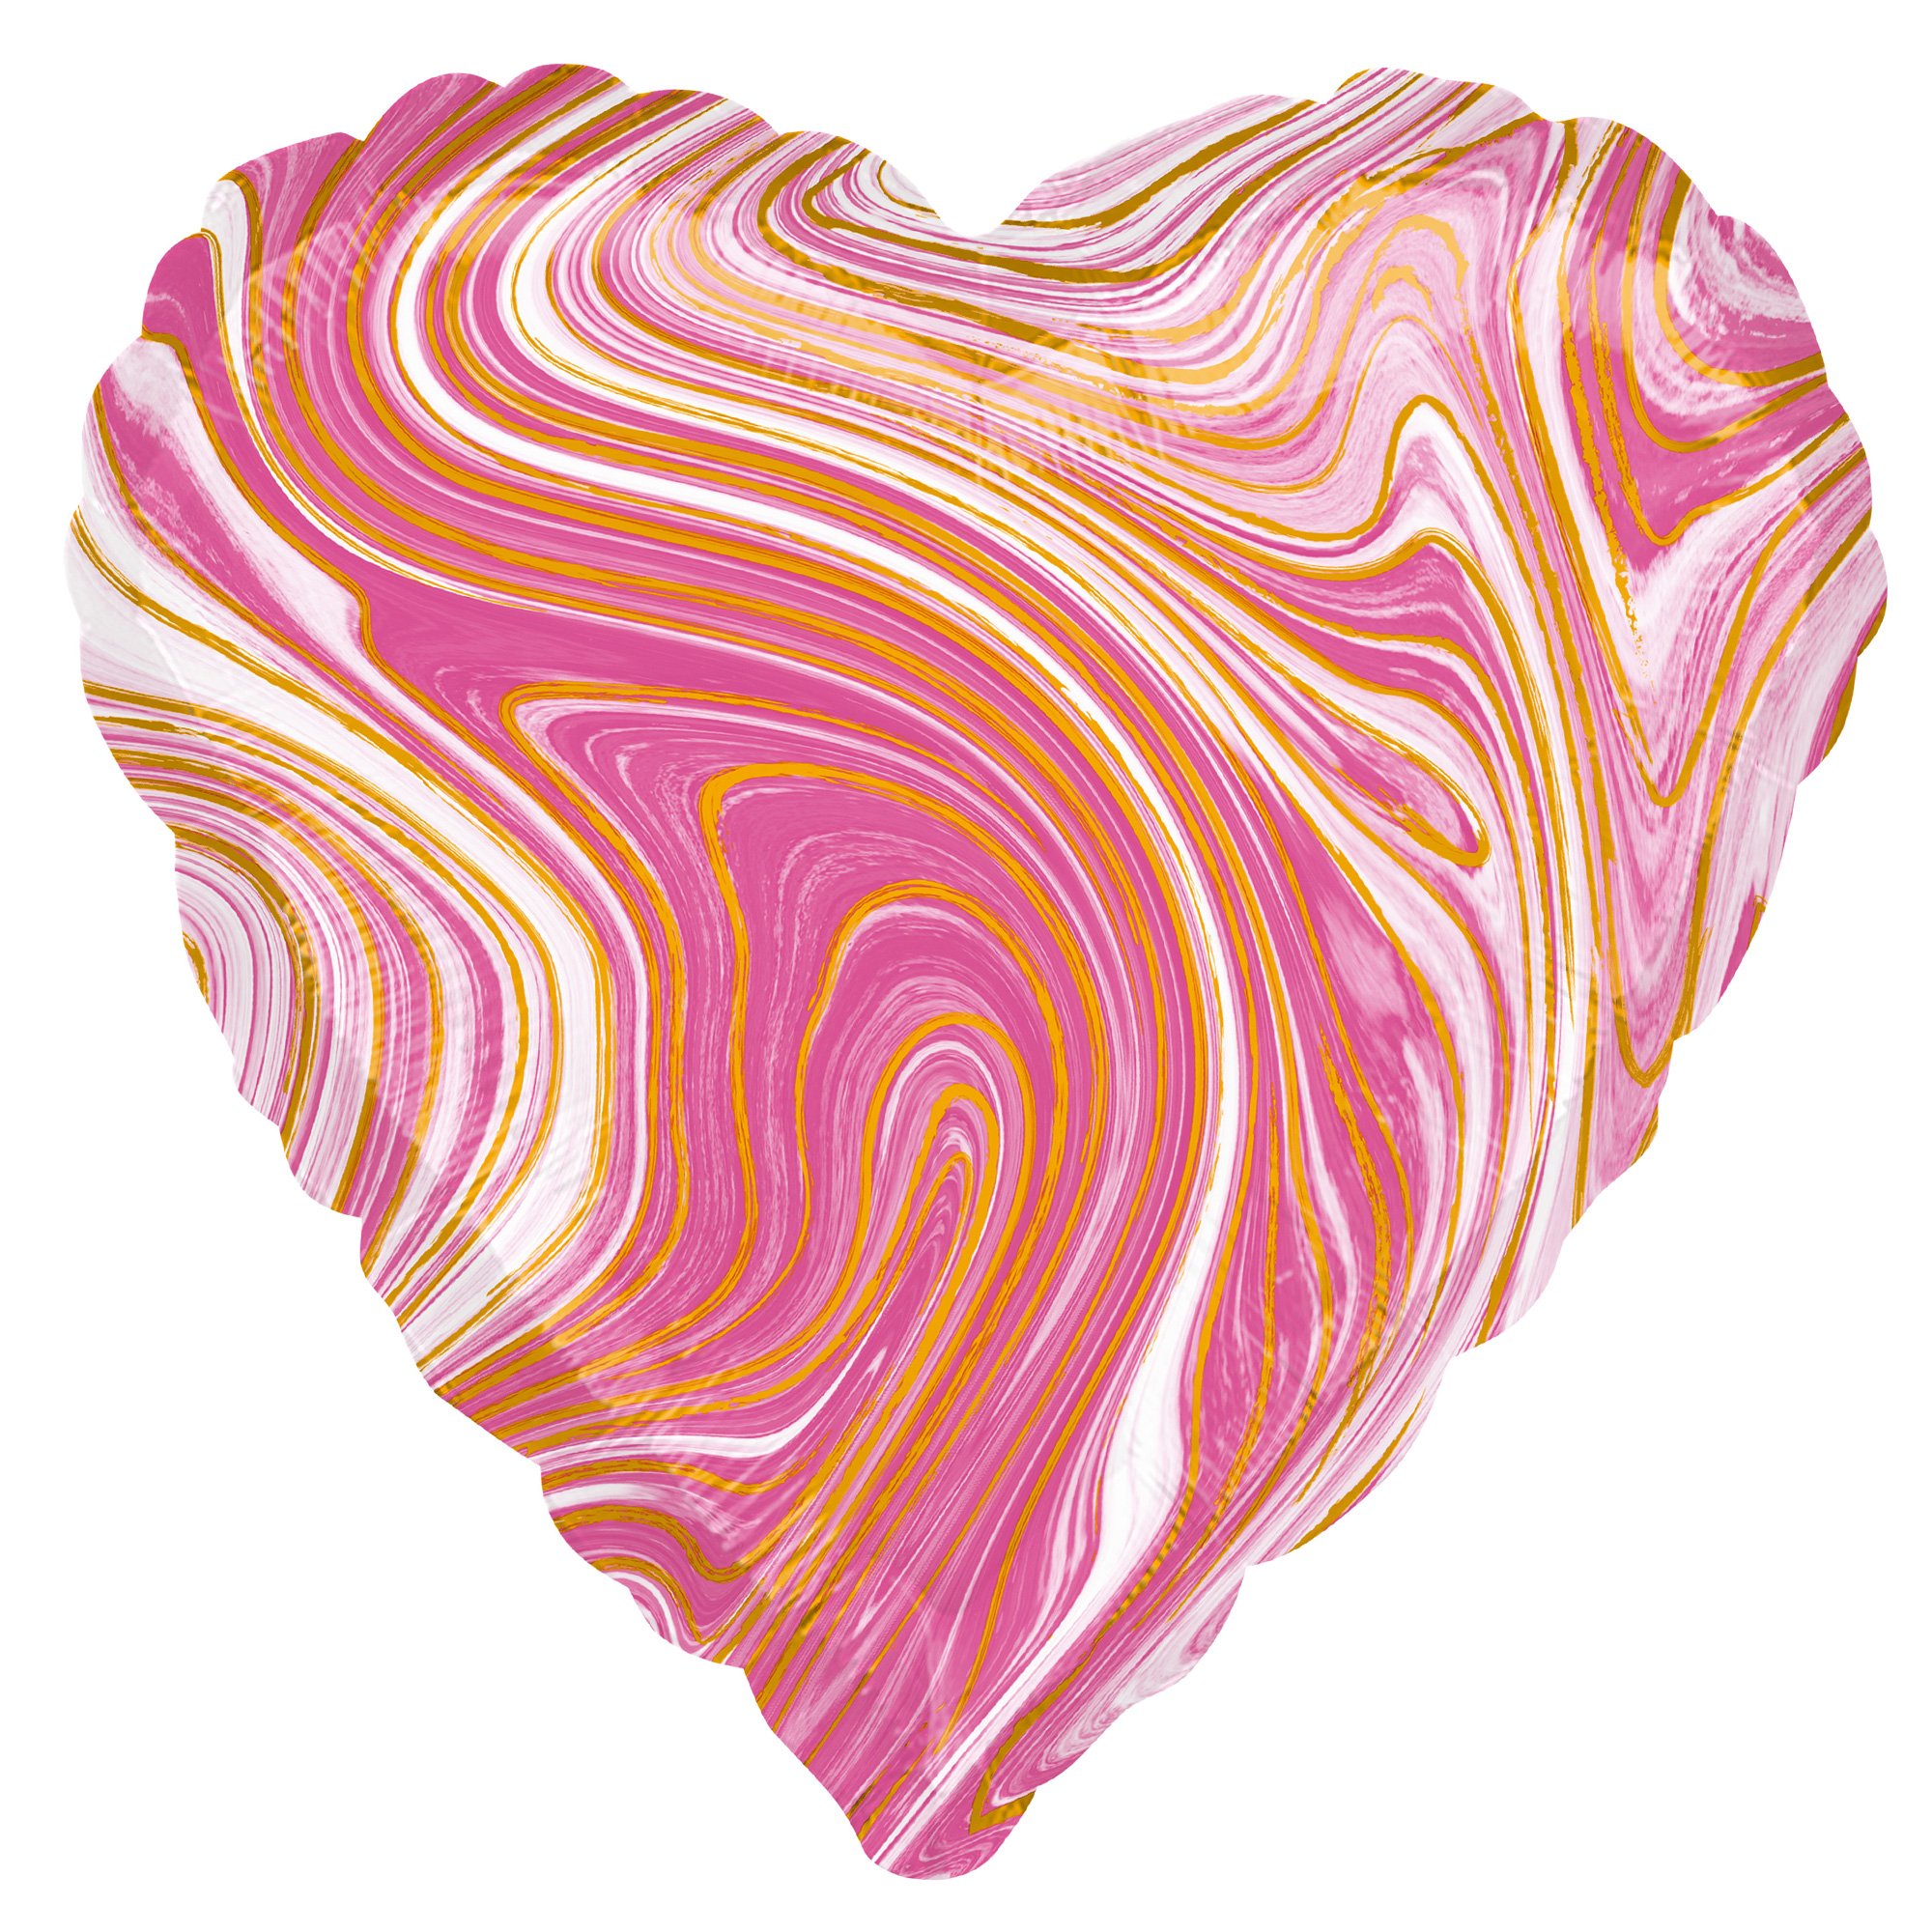 Pink Heart Marble-Effect 17-Inch Foil Helium Balloon